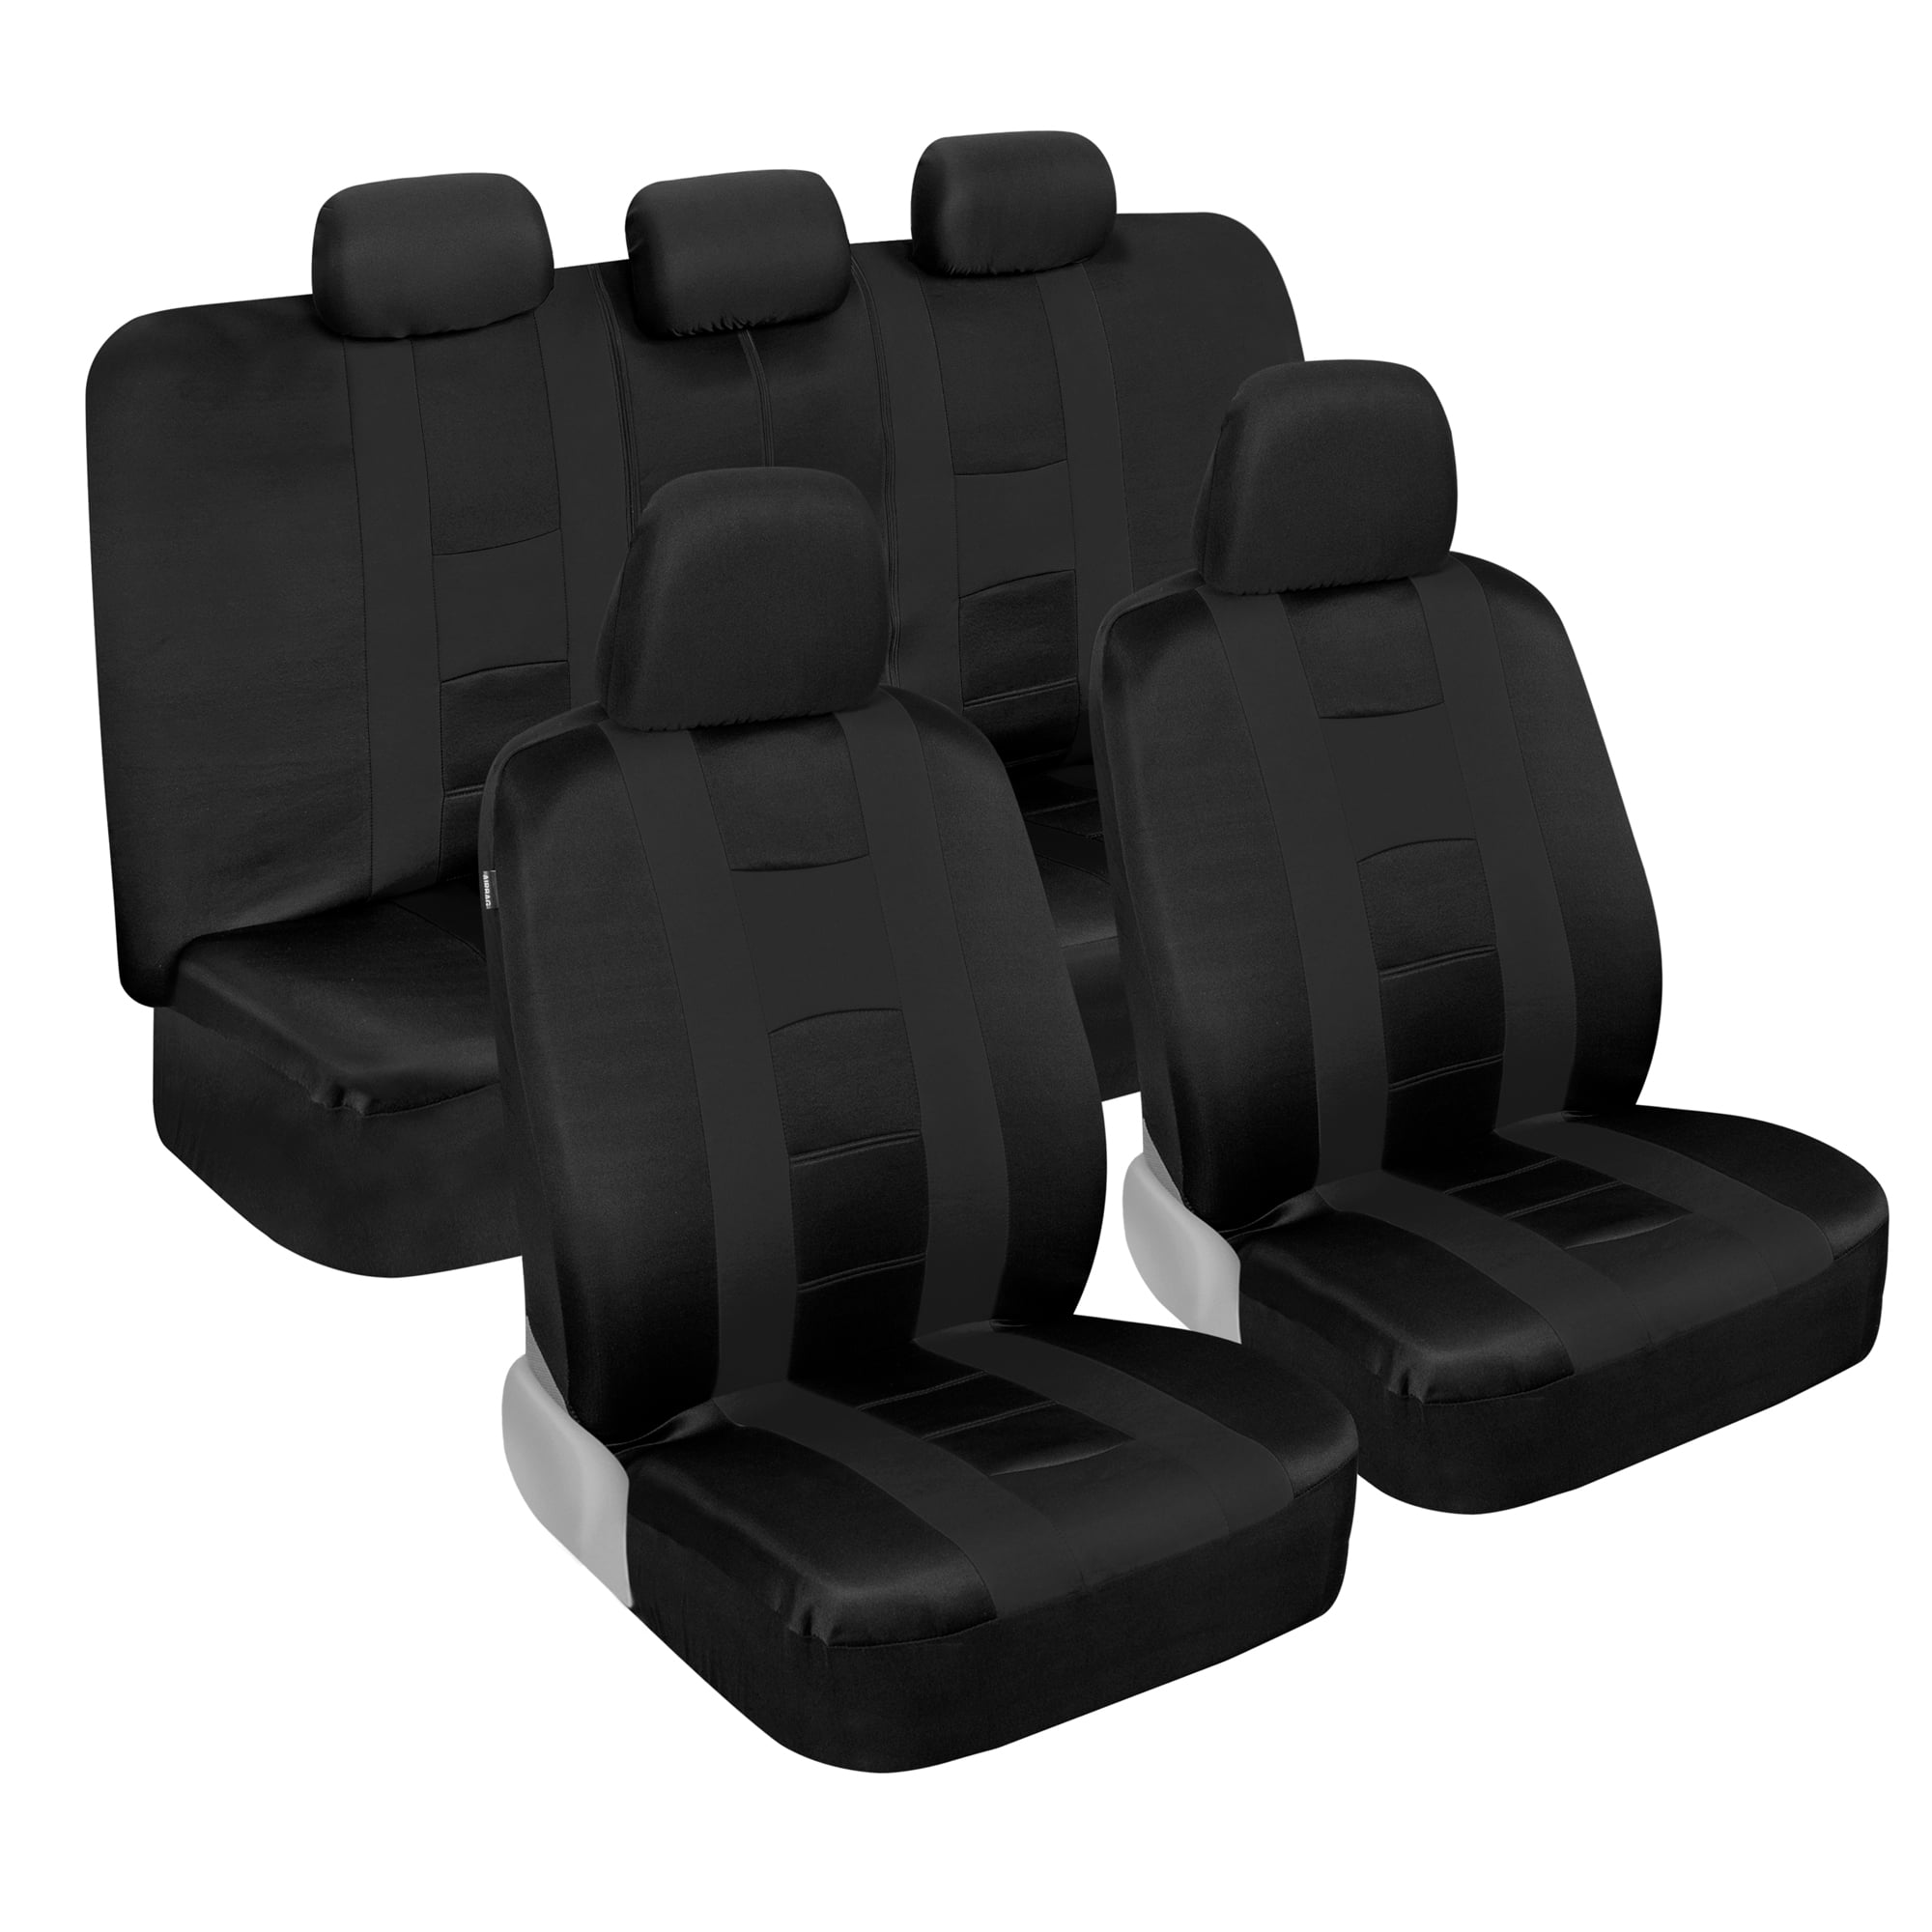 Turismo Full Set Car Seat Covers Front & Rear Bench for Auto Truck